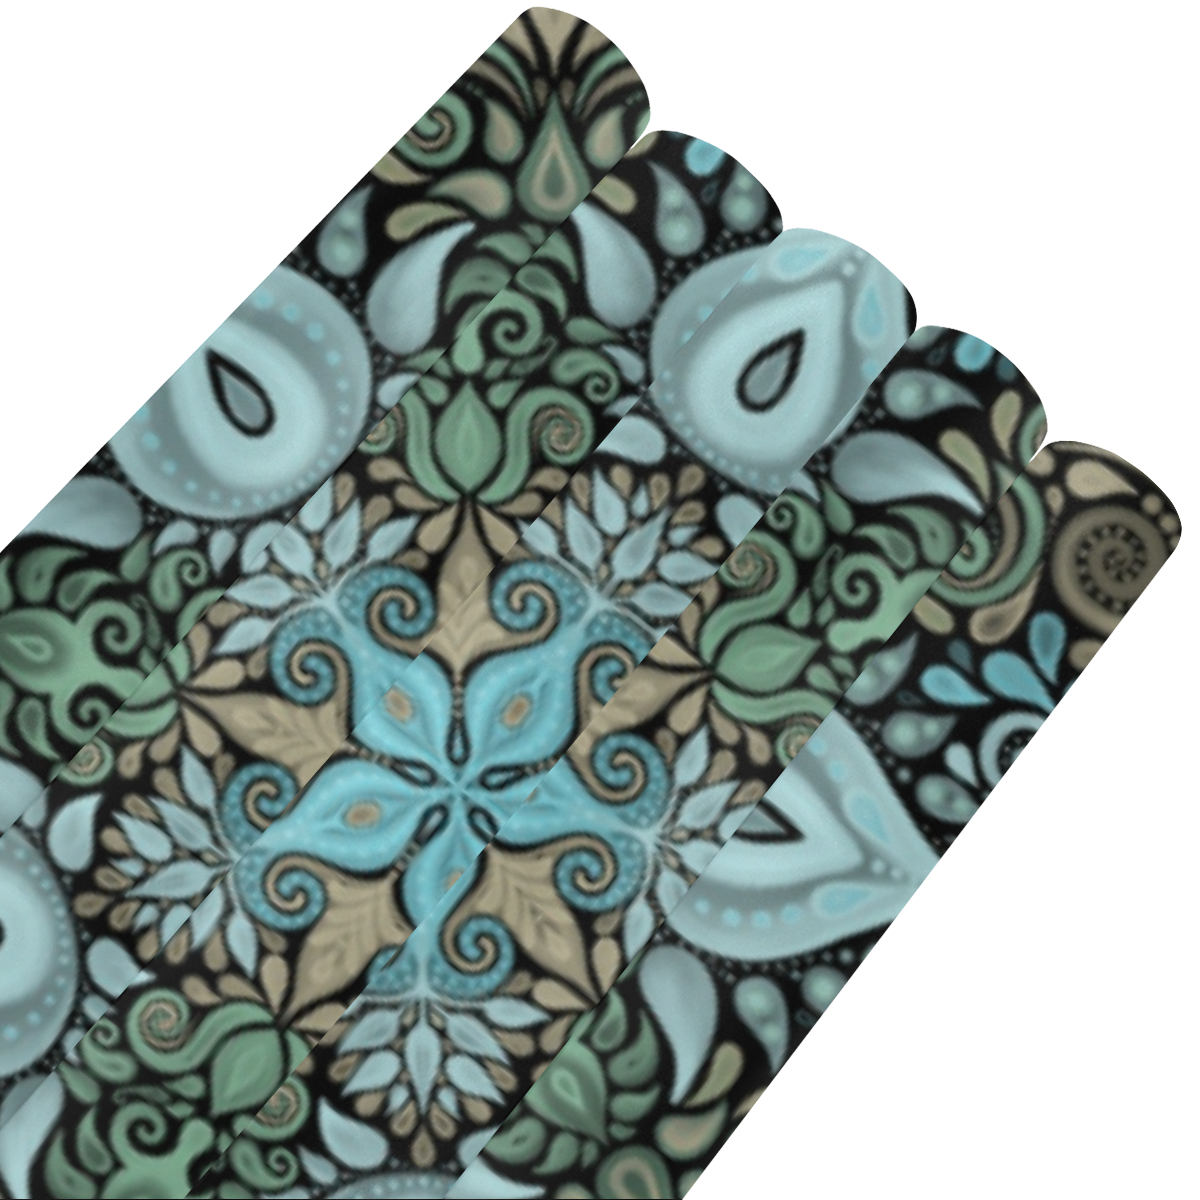 Baroque Garden Watercolor Turquoise Mandala Gift Wrapping Paper 58"x 23" (5 Rolls)